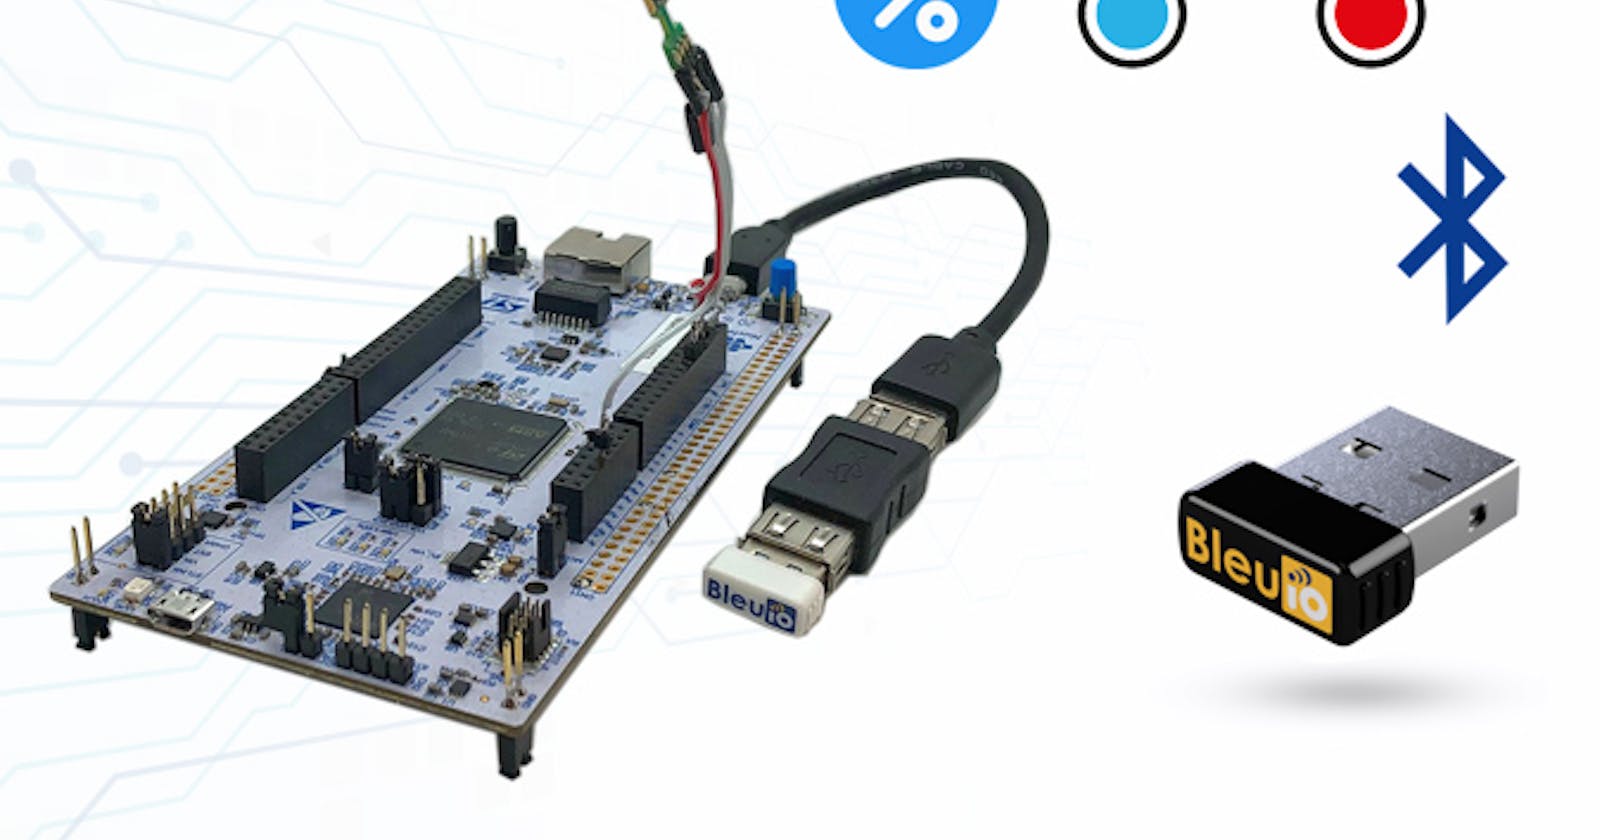 Read real-time temperature humidity sensor data from STM32 using Web Bluetooth